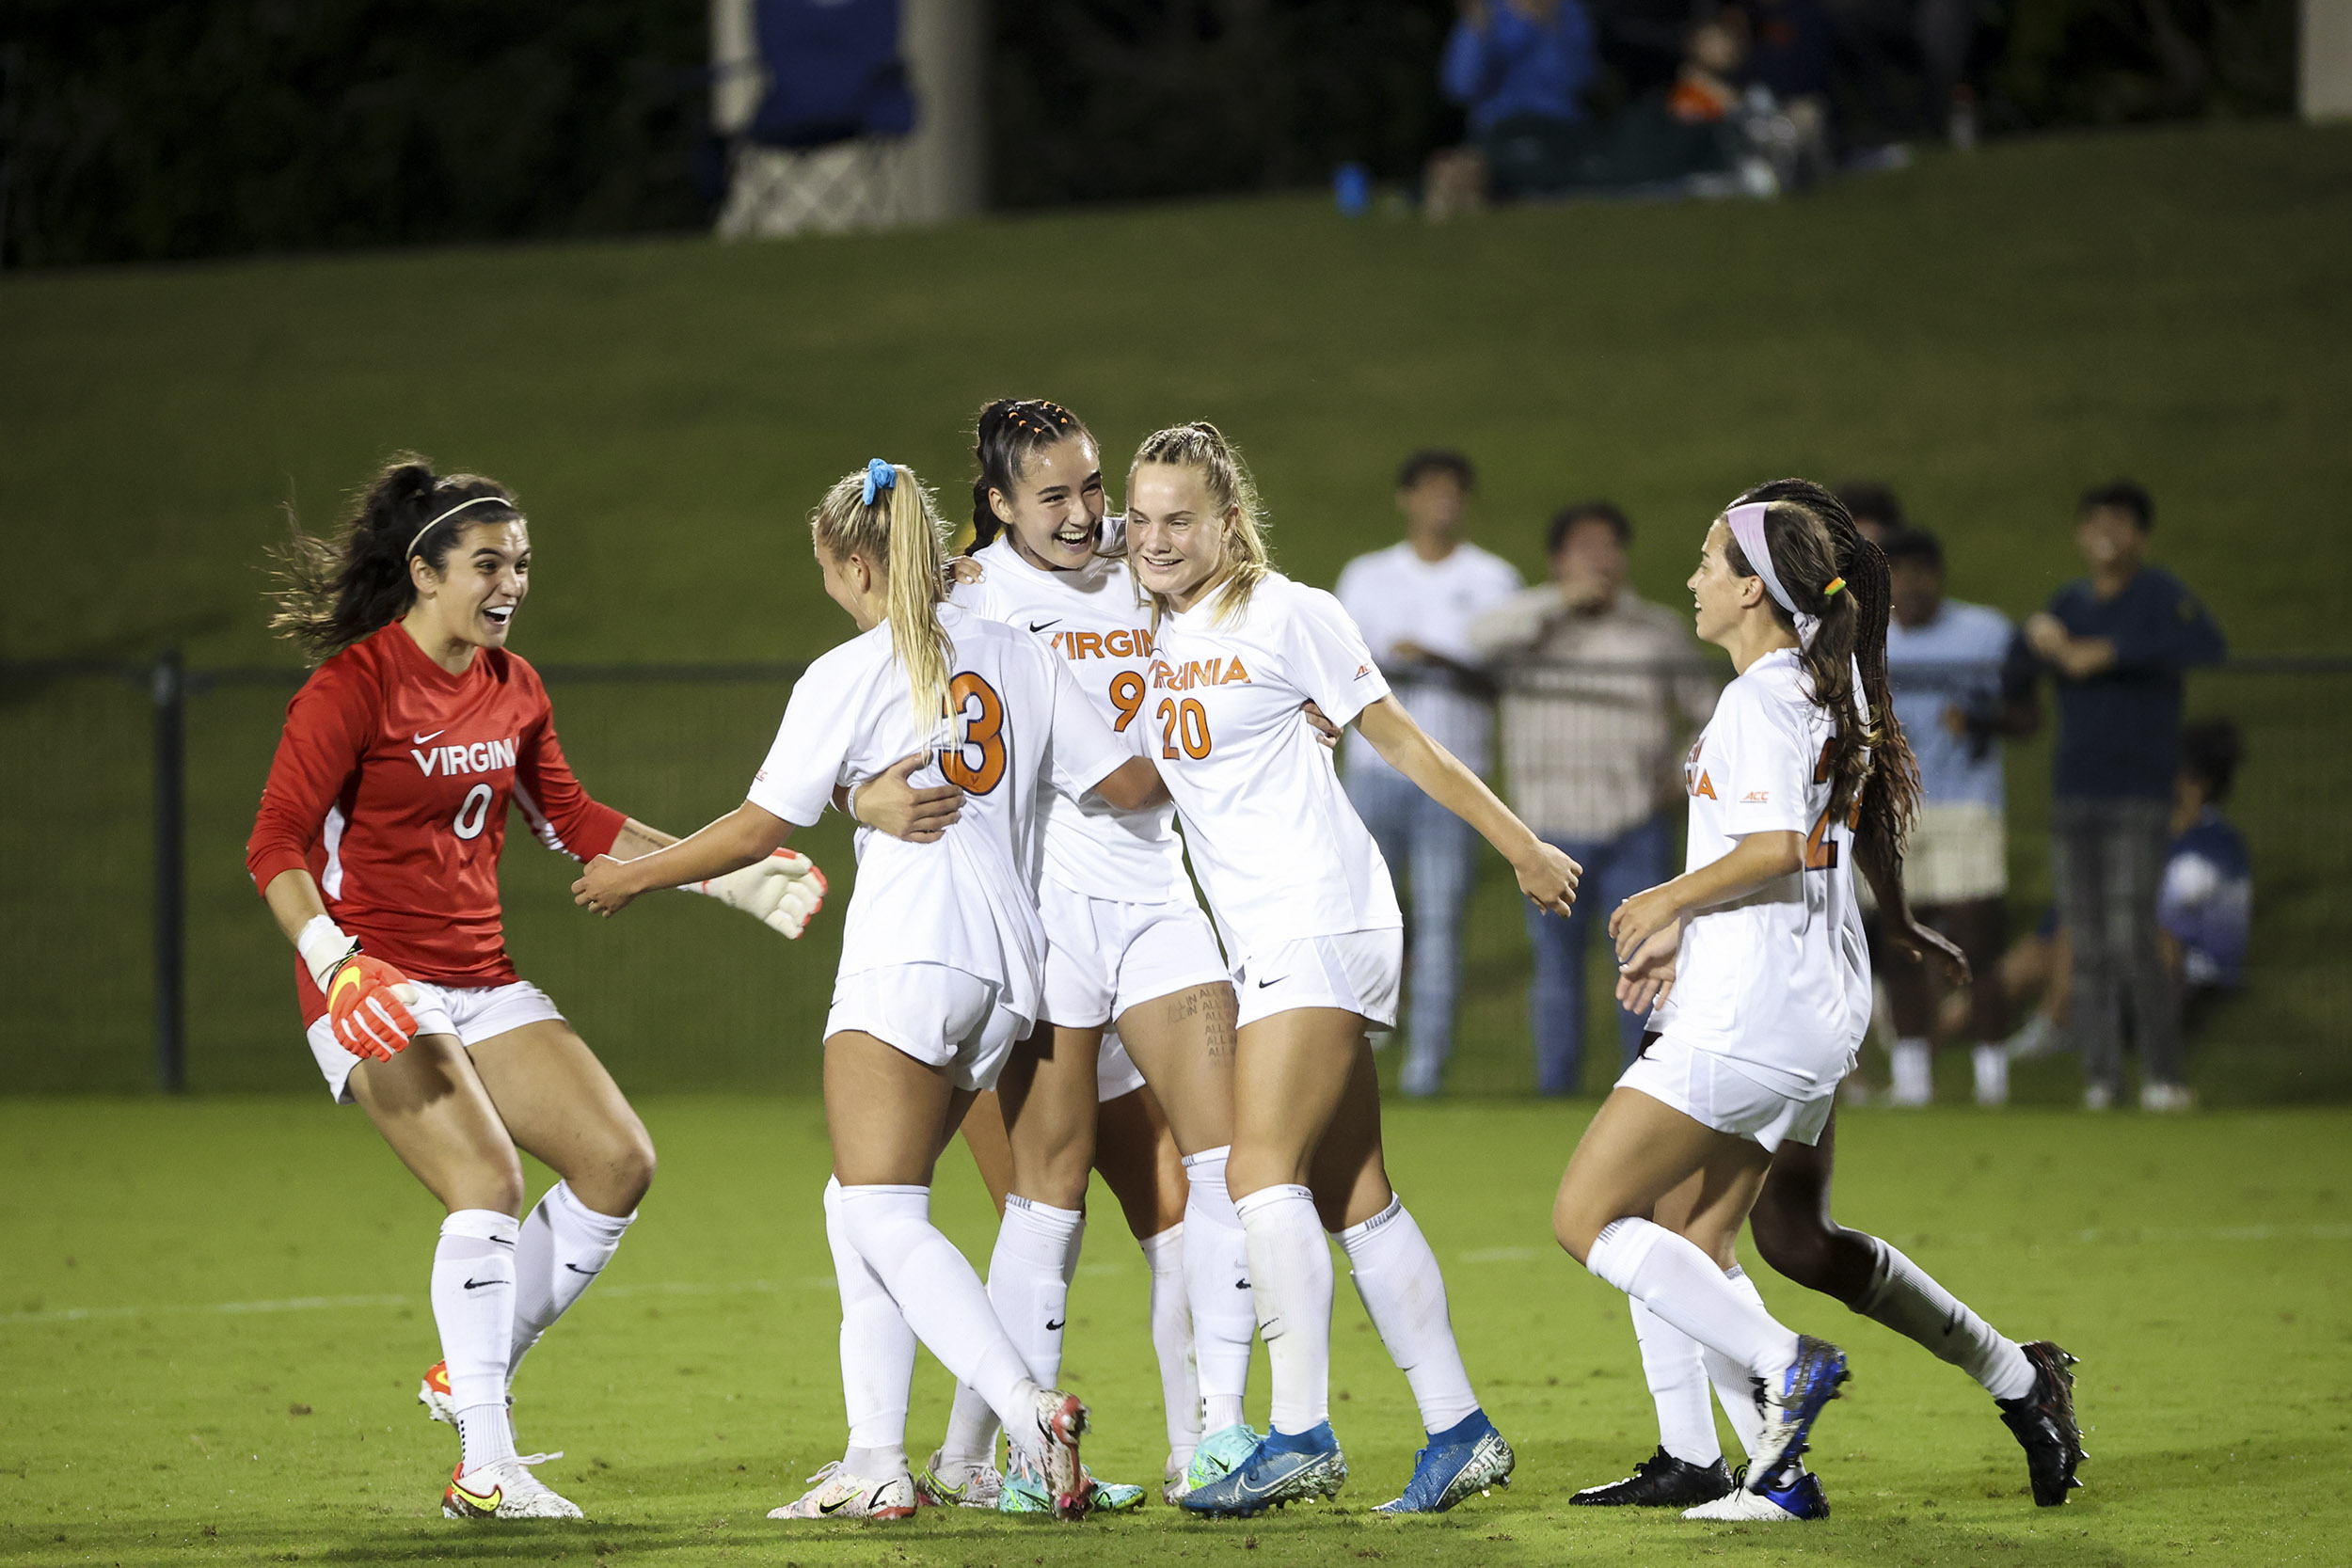 UVA Womens soccer team embracing each other on the field after winning game